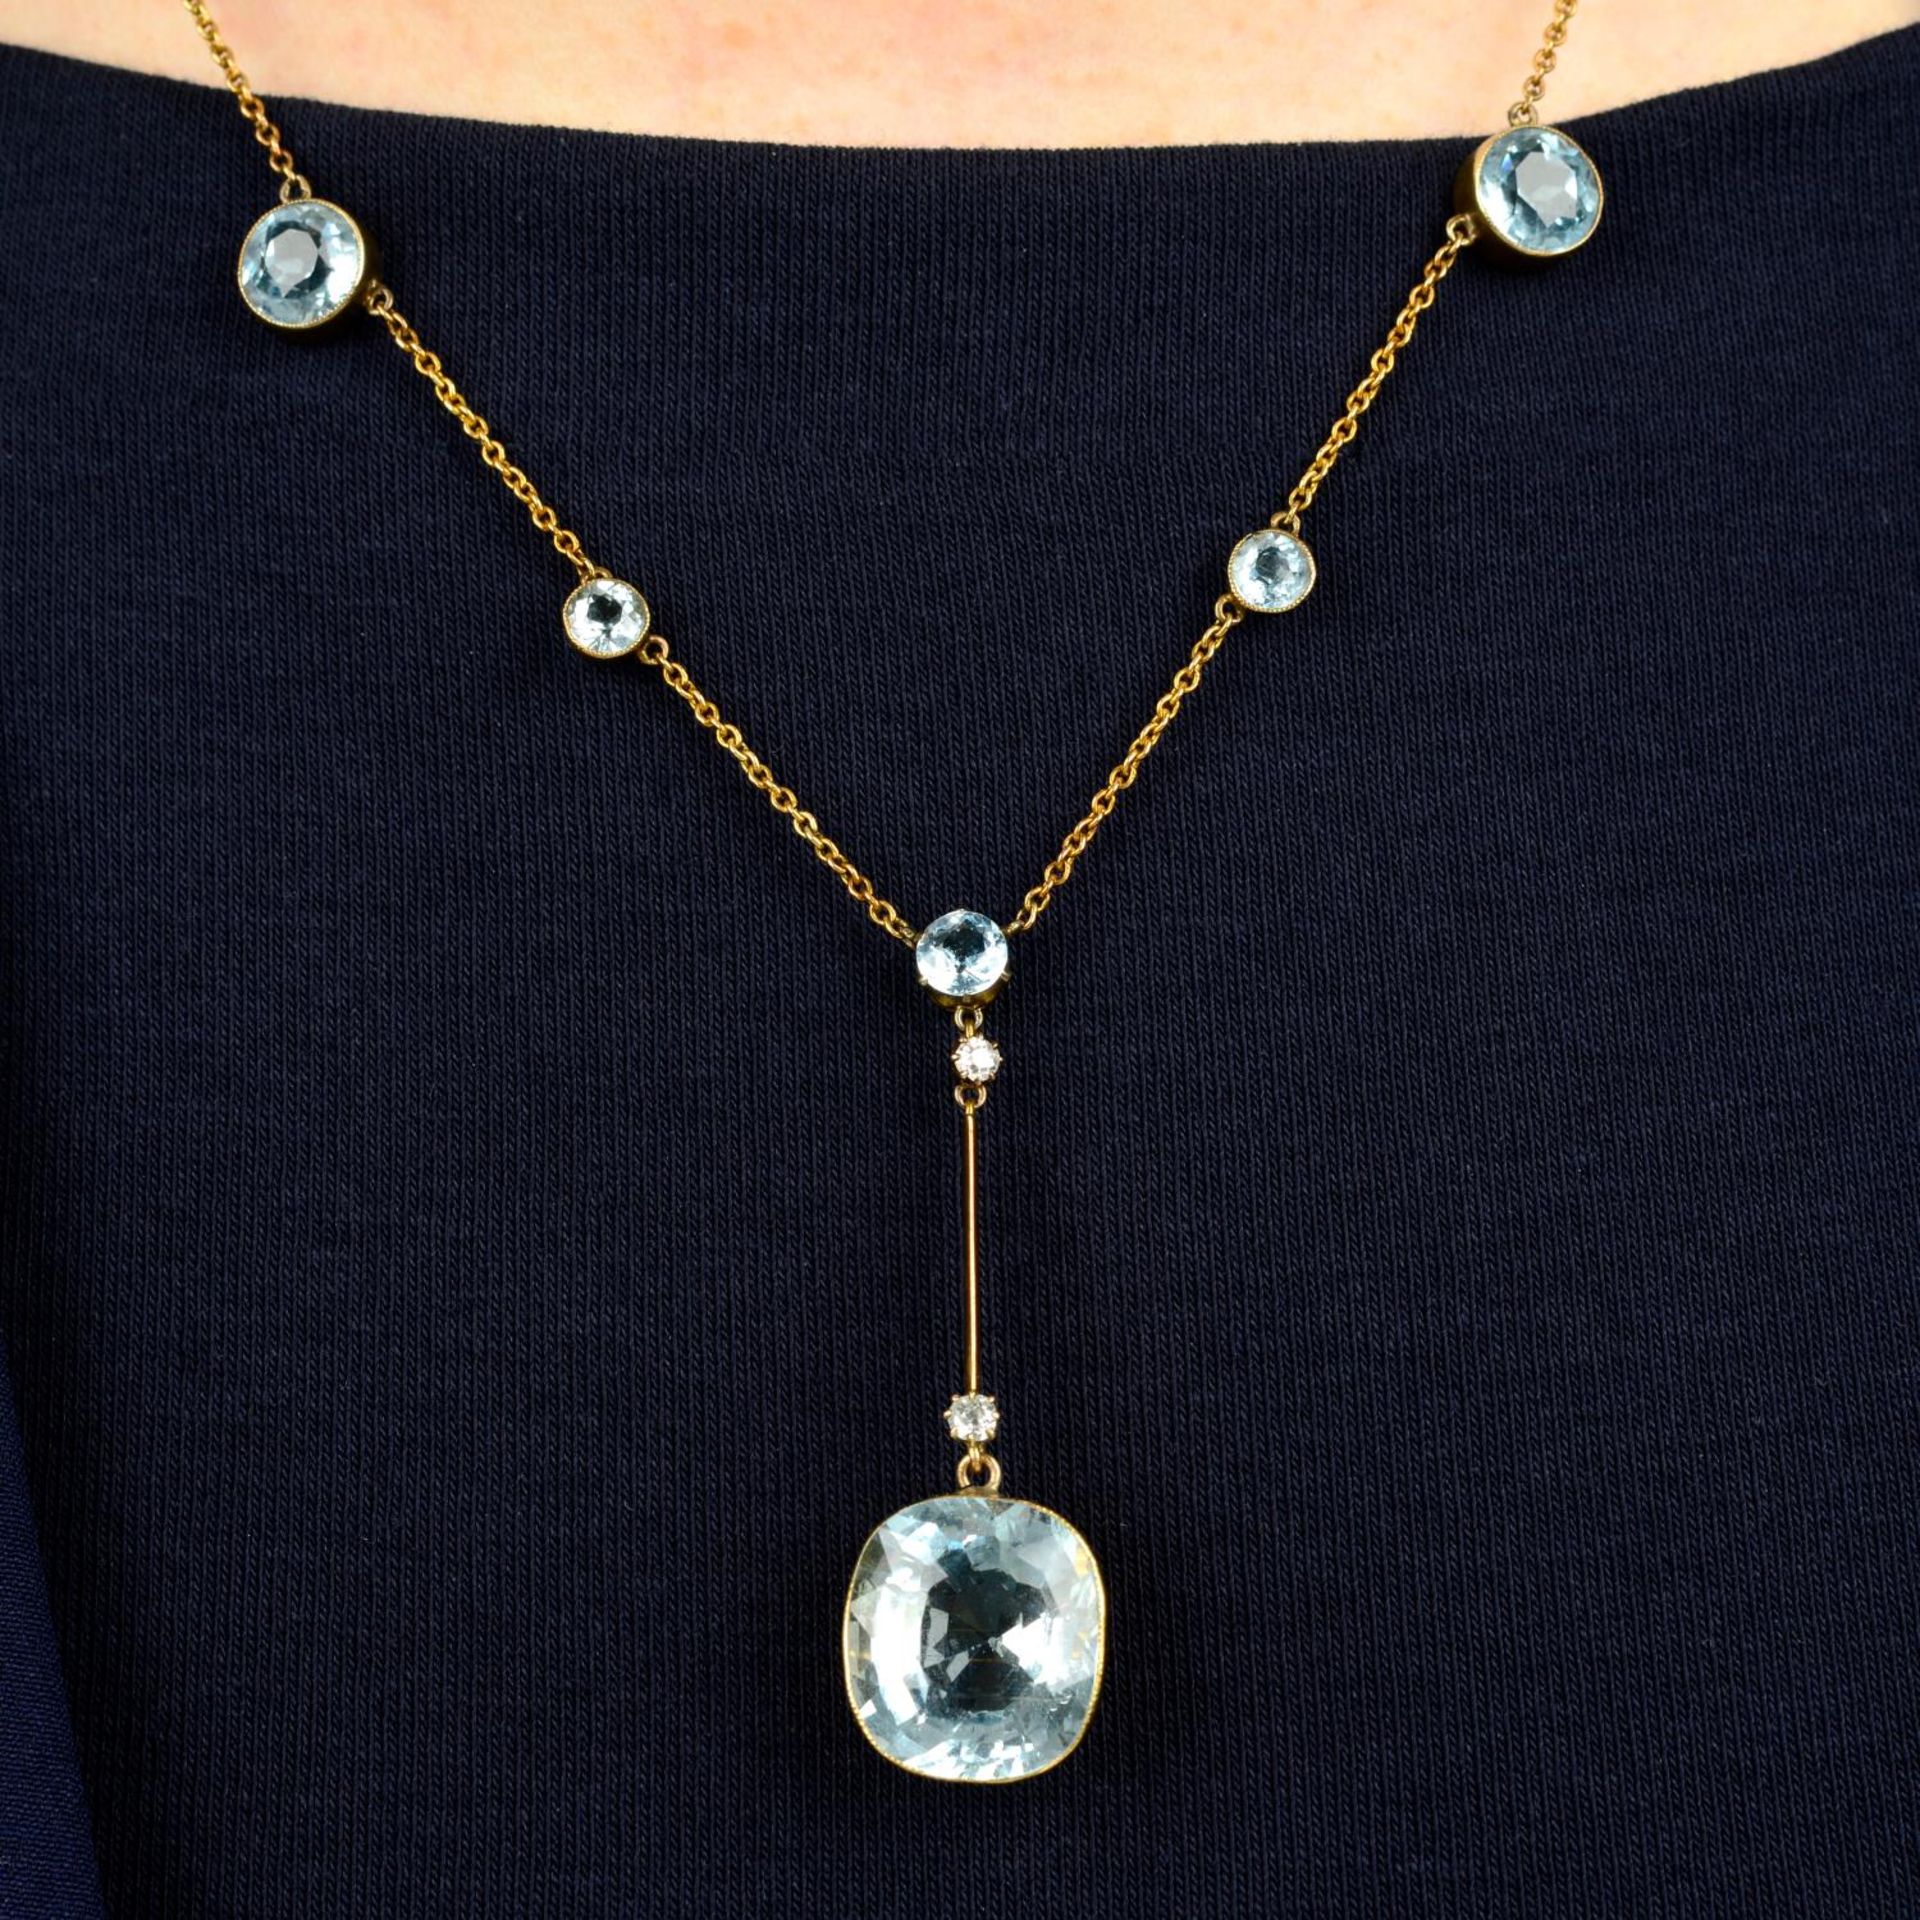 An early 20th century 15ct gold aquamarine and diamond necklace.